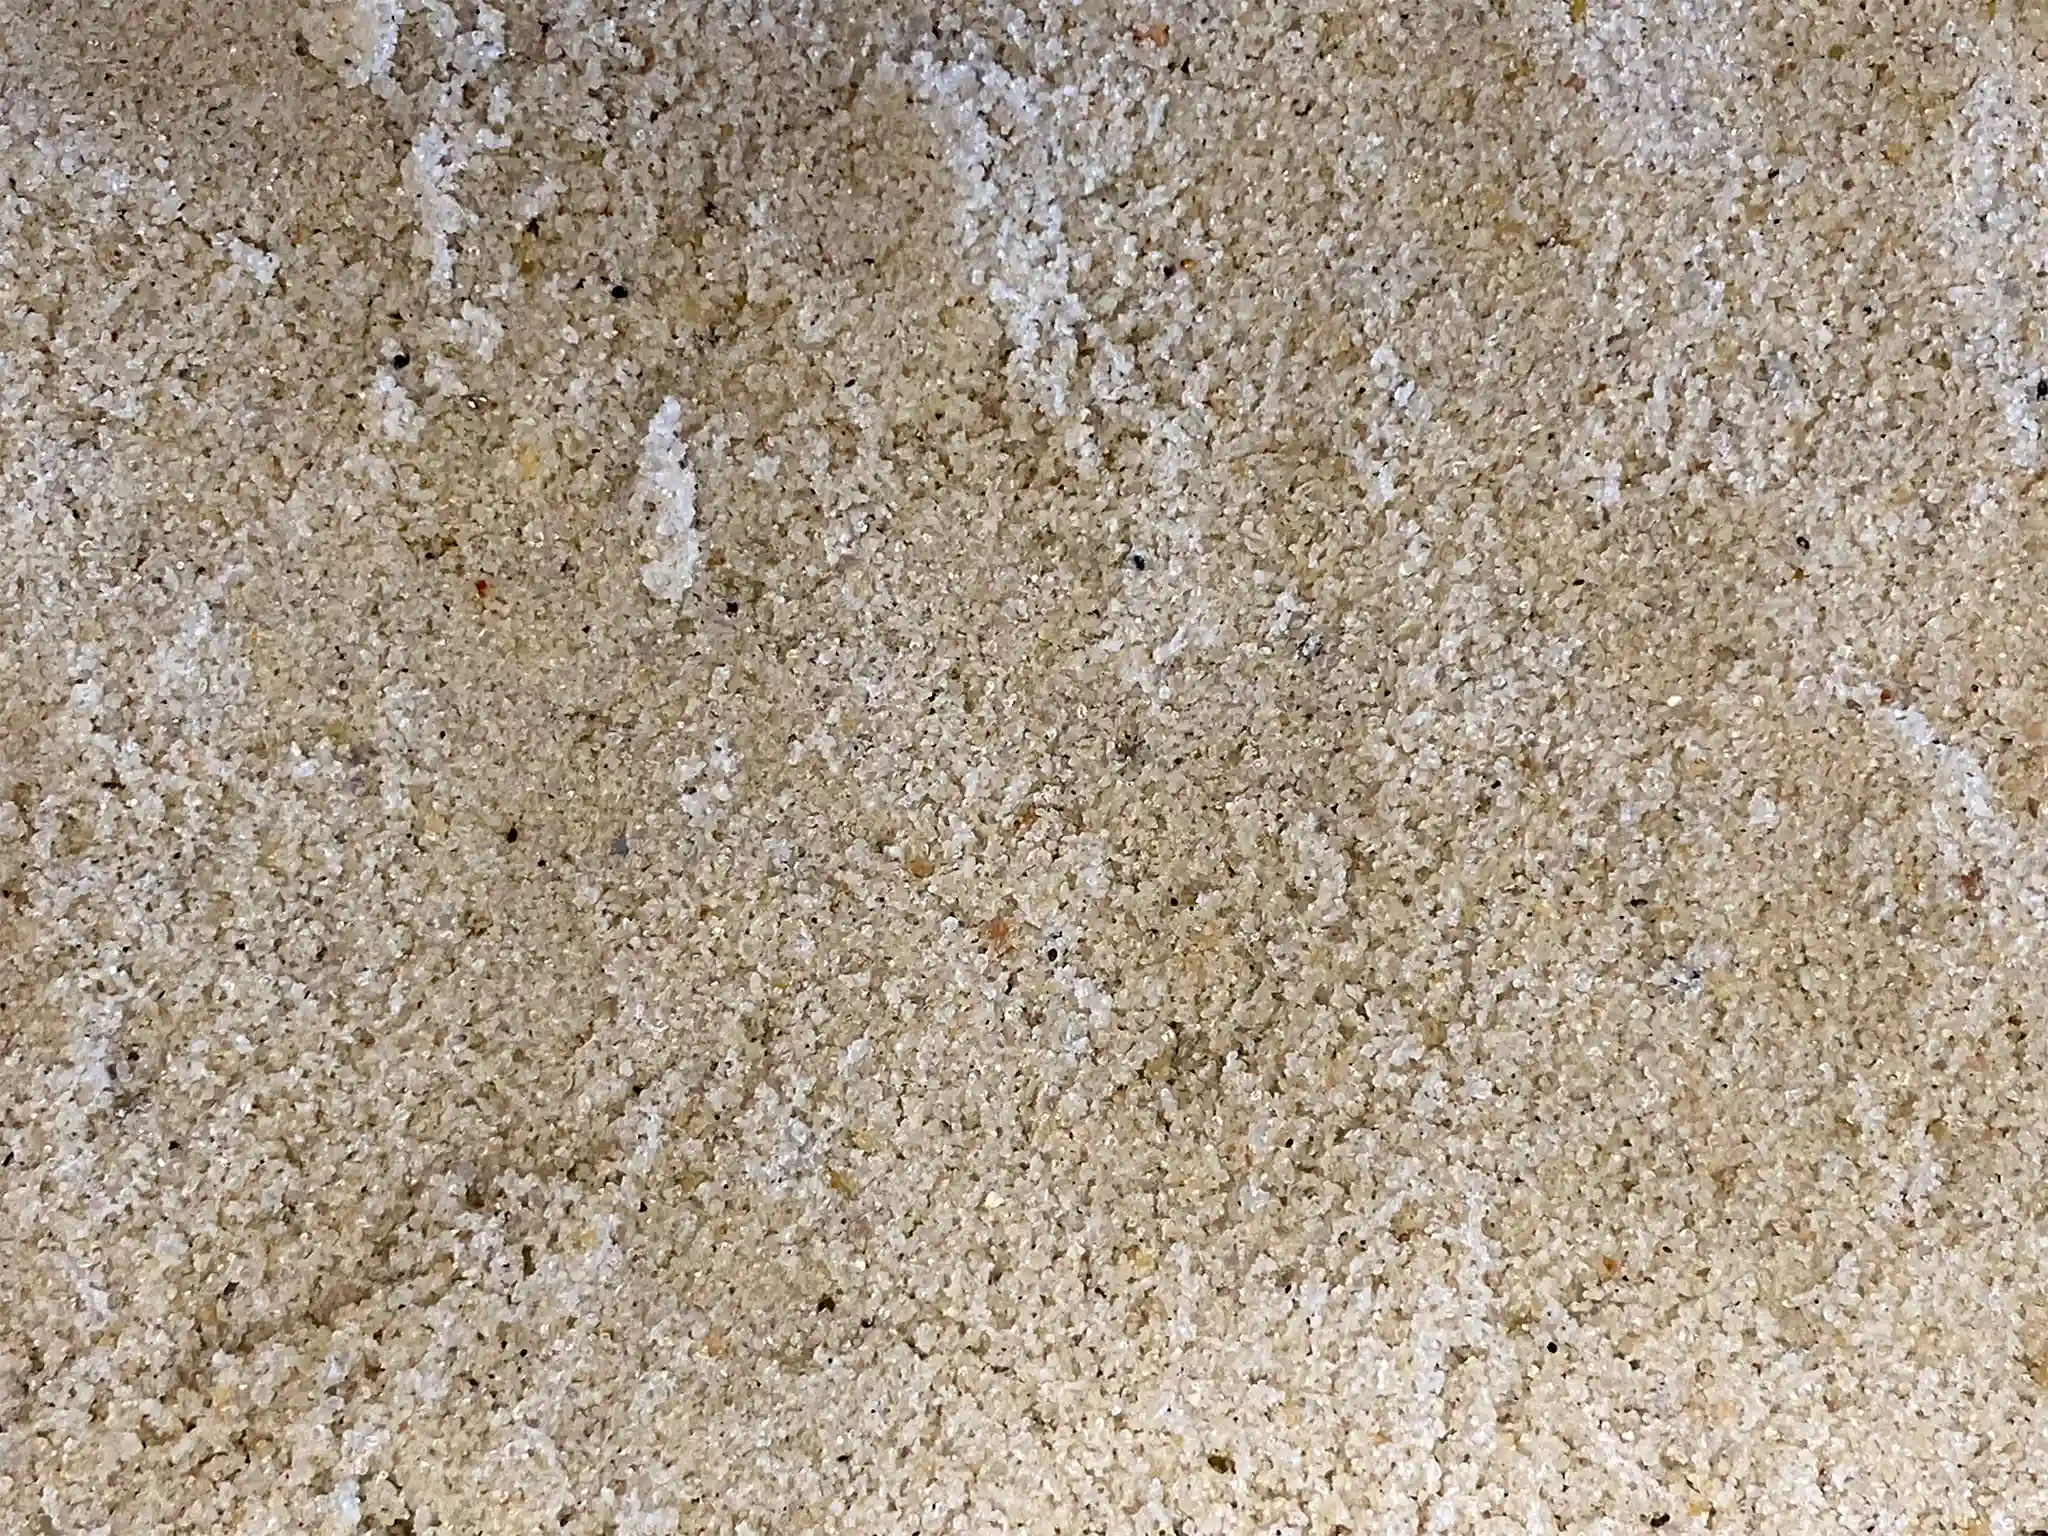 A close-up view of Pro Choice Tan sand.